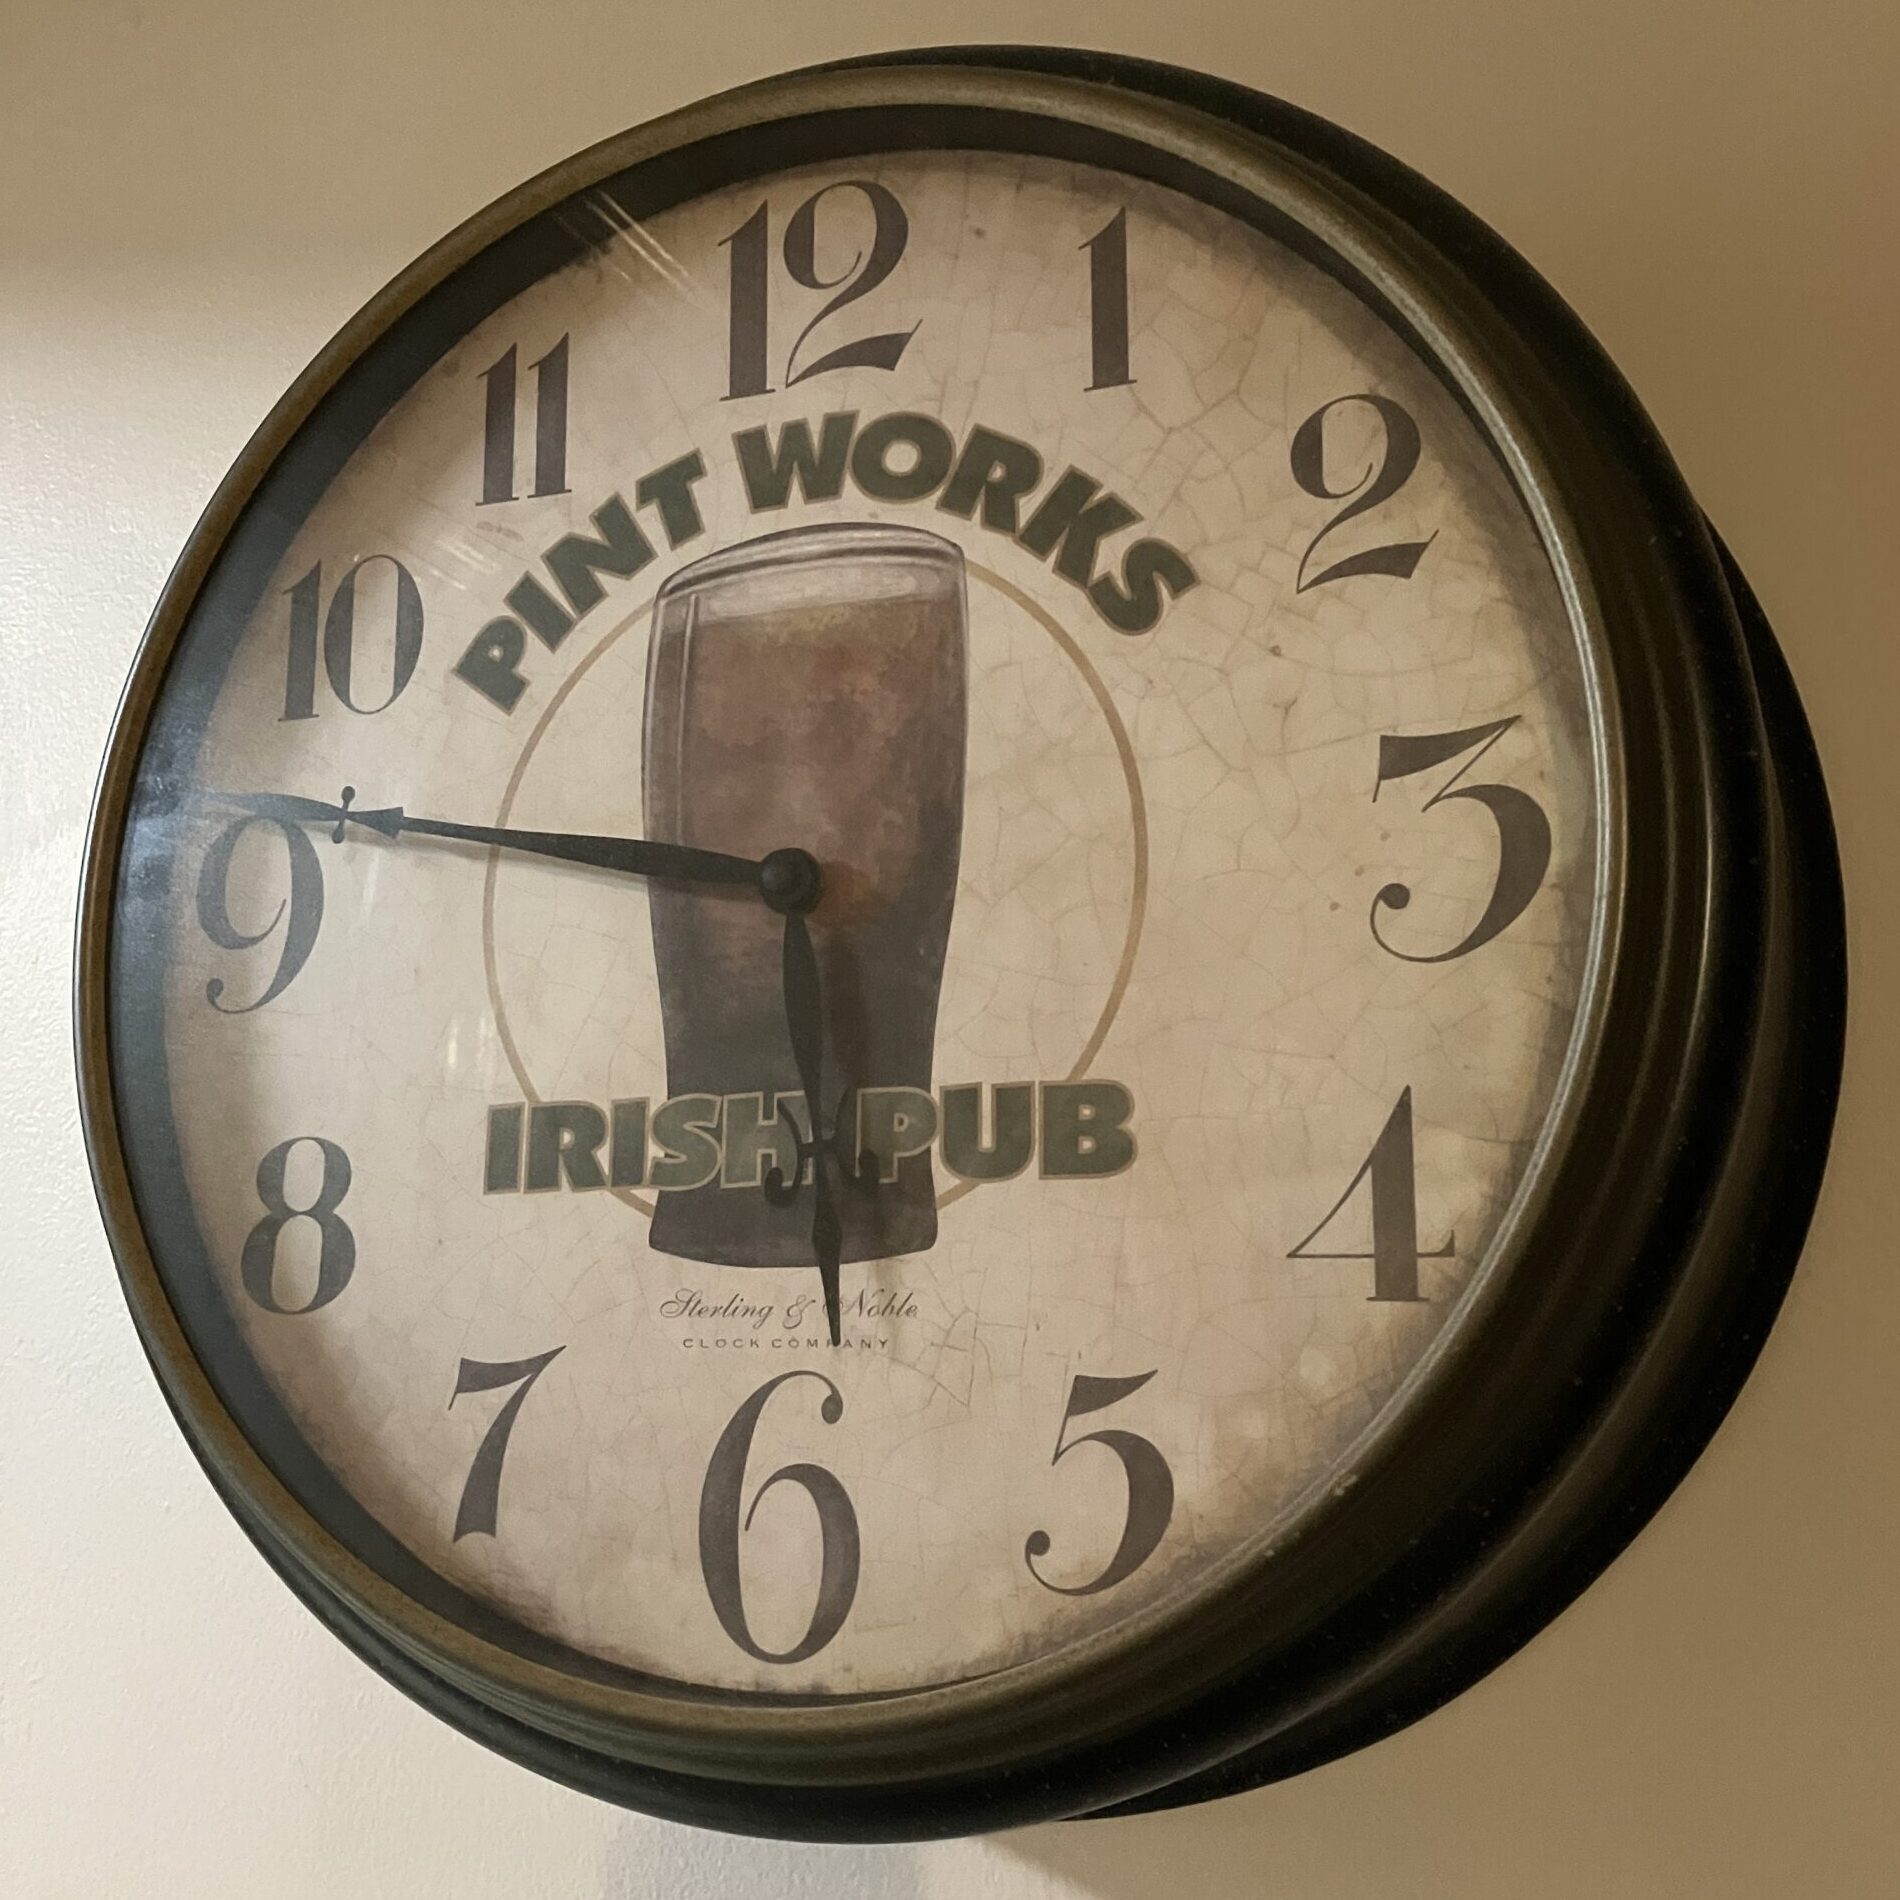 A wall clock displaying a time of about 5:46, the face has a pint of beer and reads, "Pint Works Irish Pub"